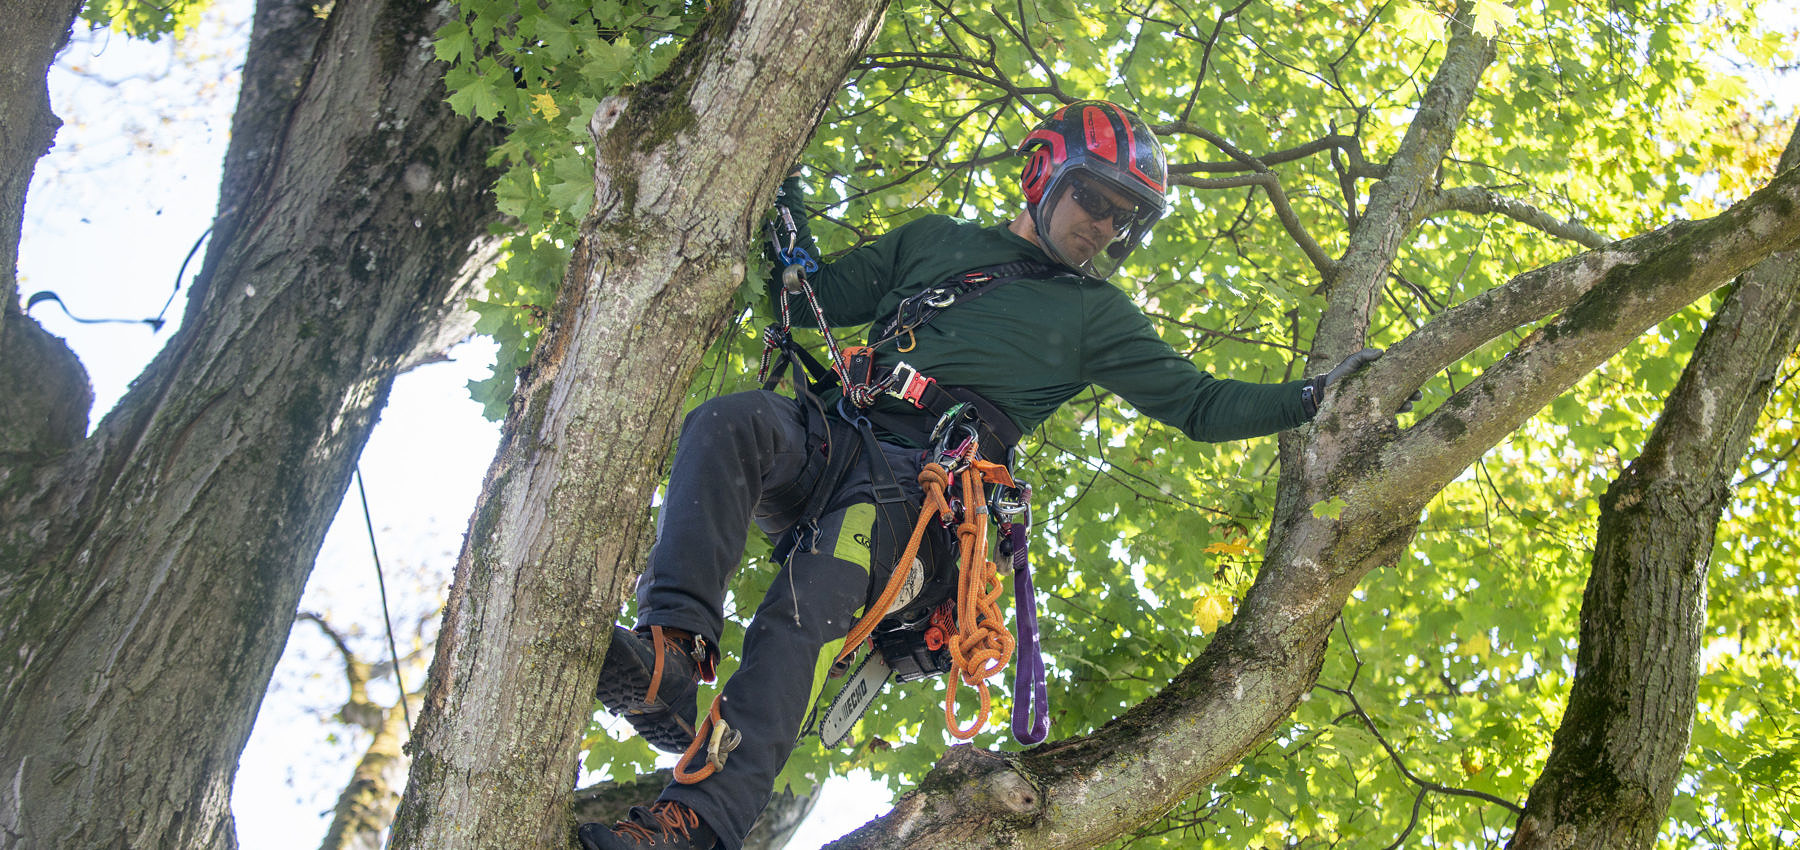 Climbing a sugar maple with gear for pruning